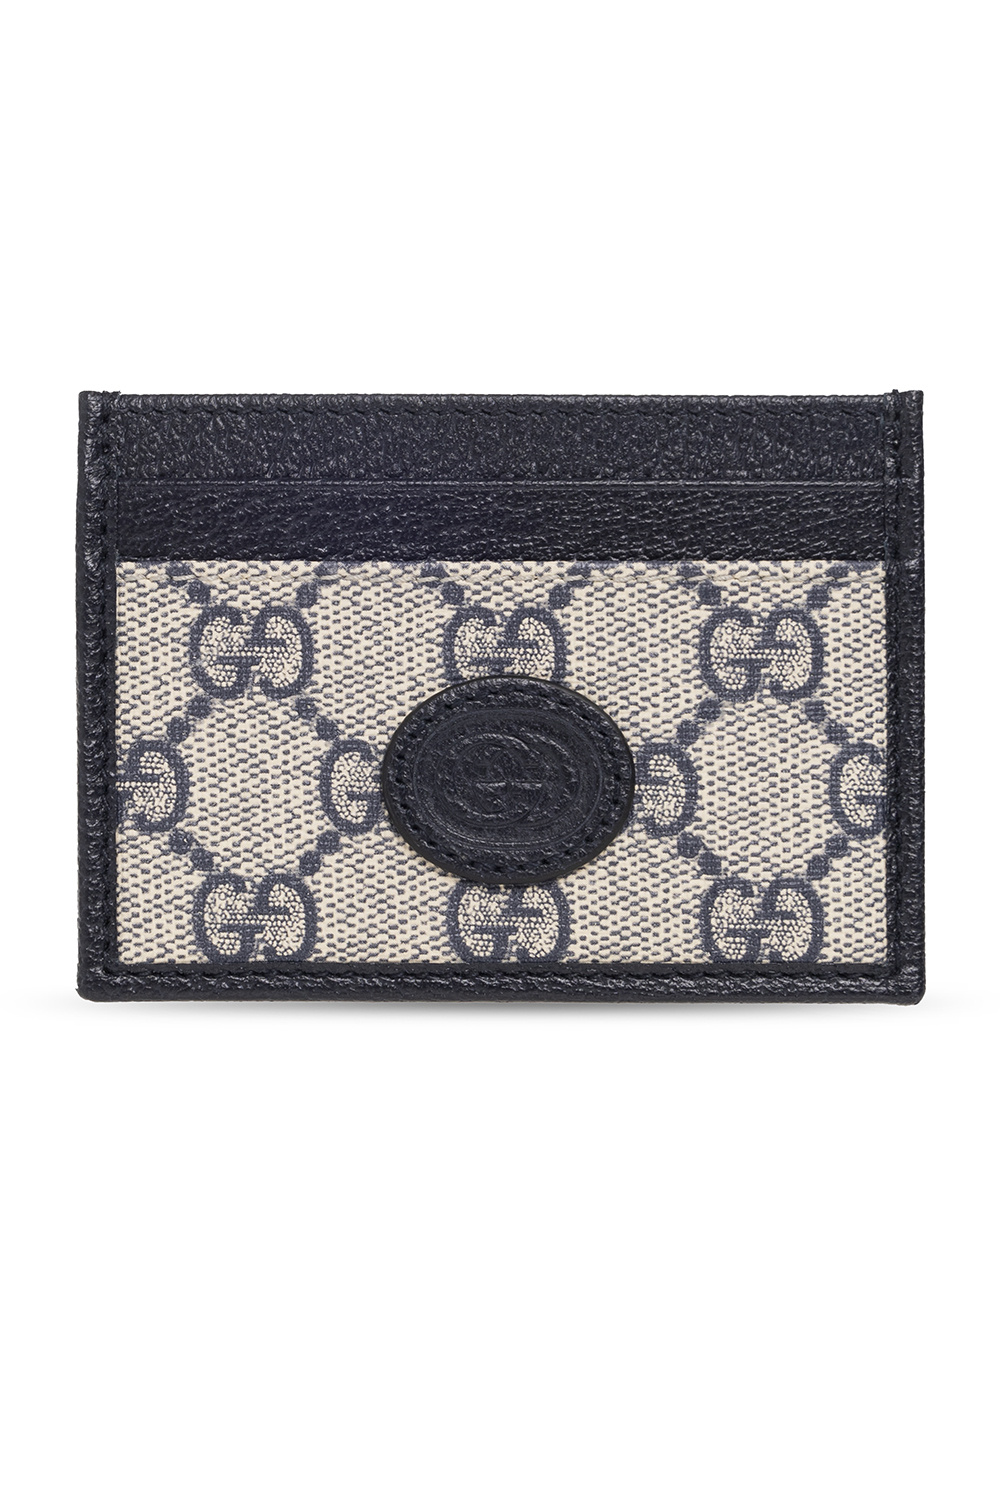 Gucci Card holder with logo